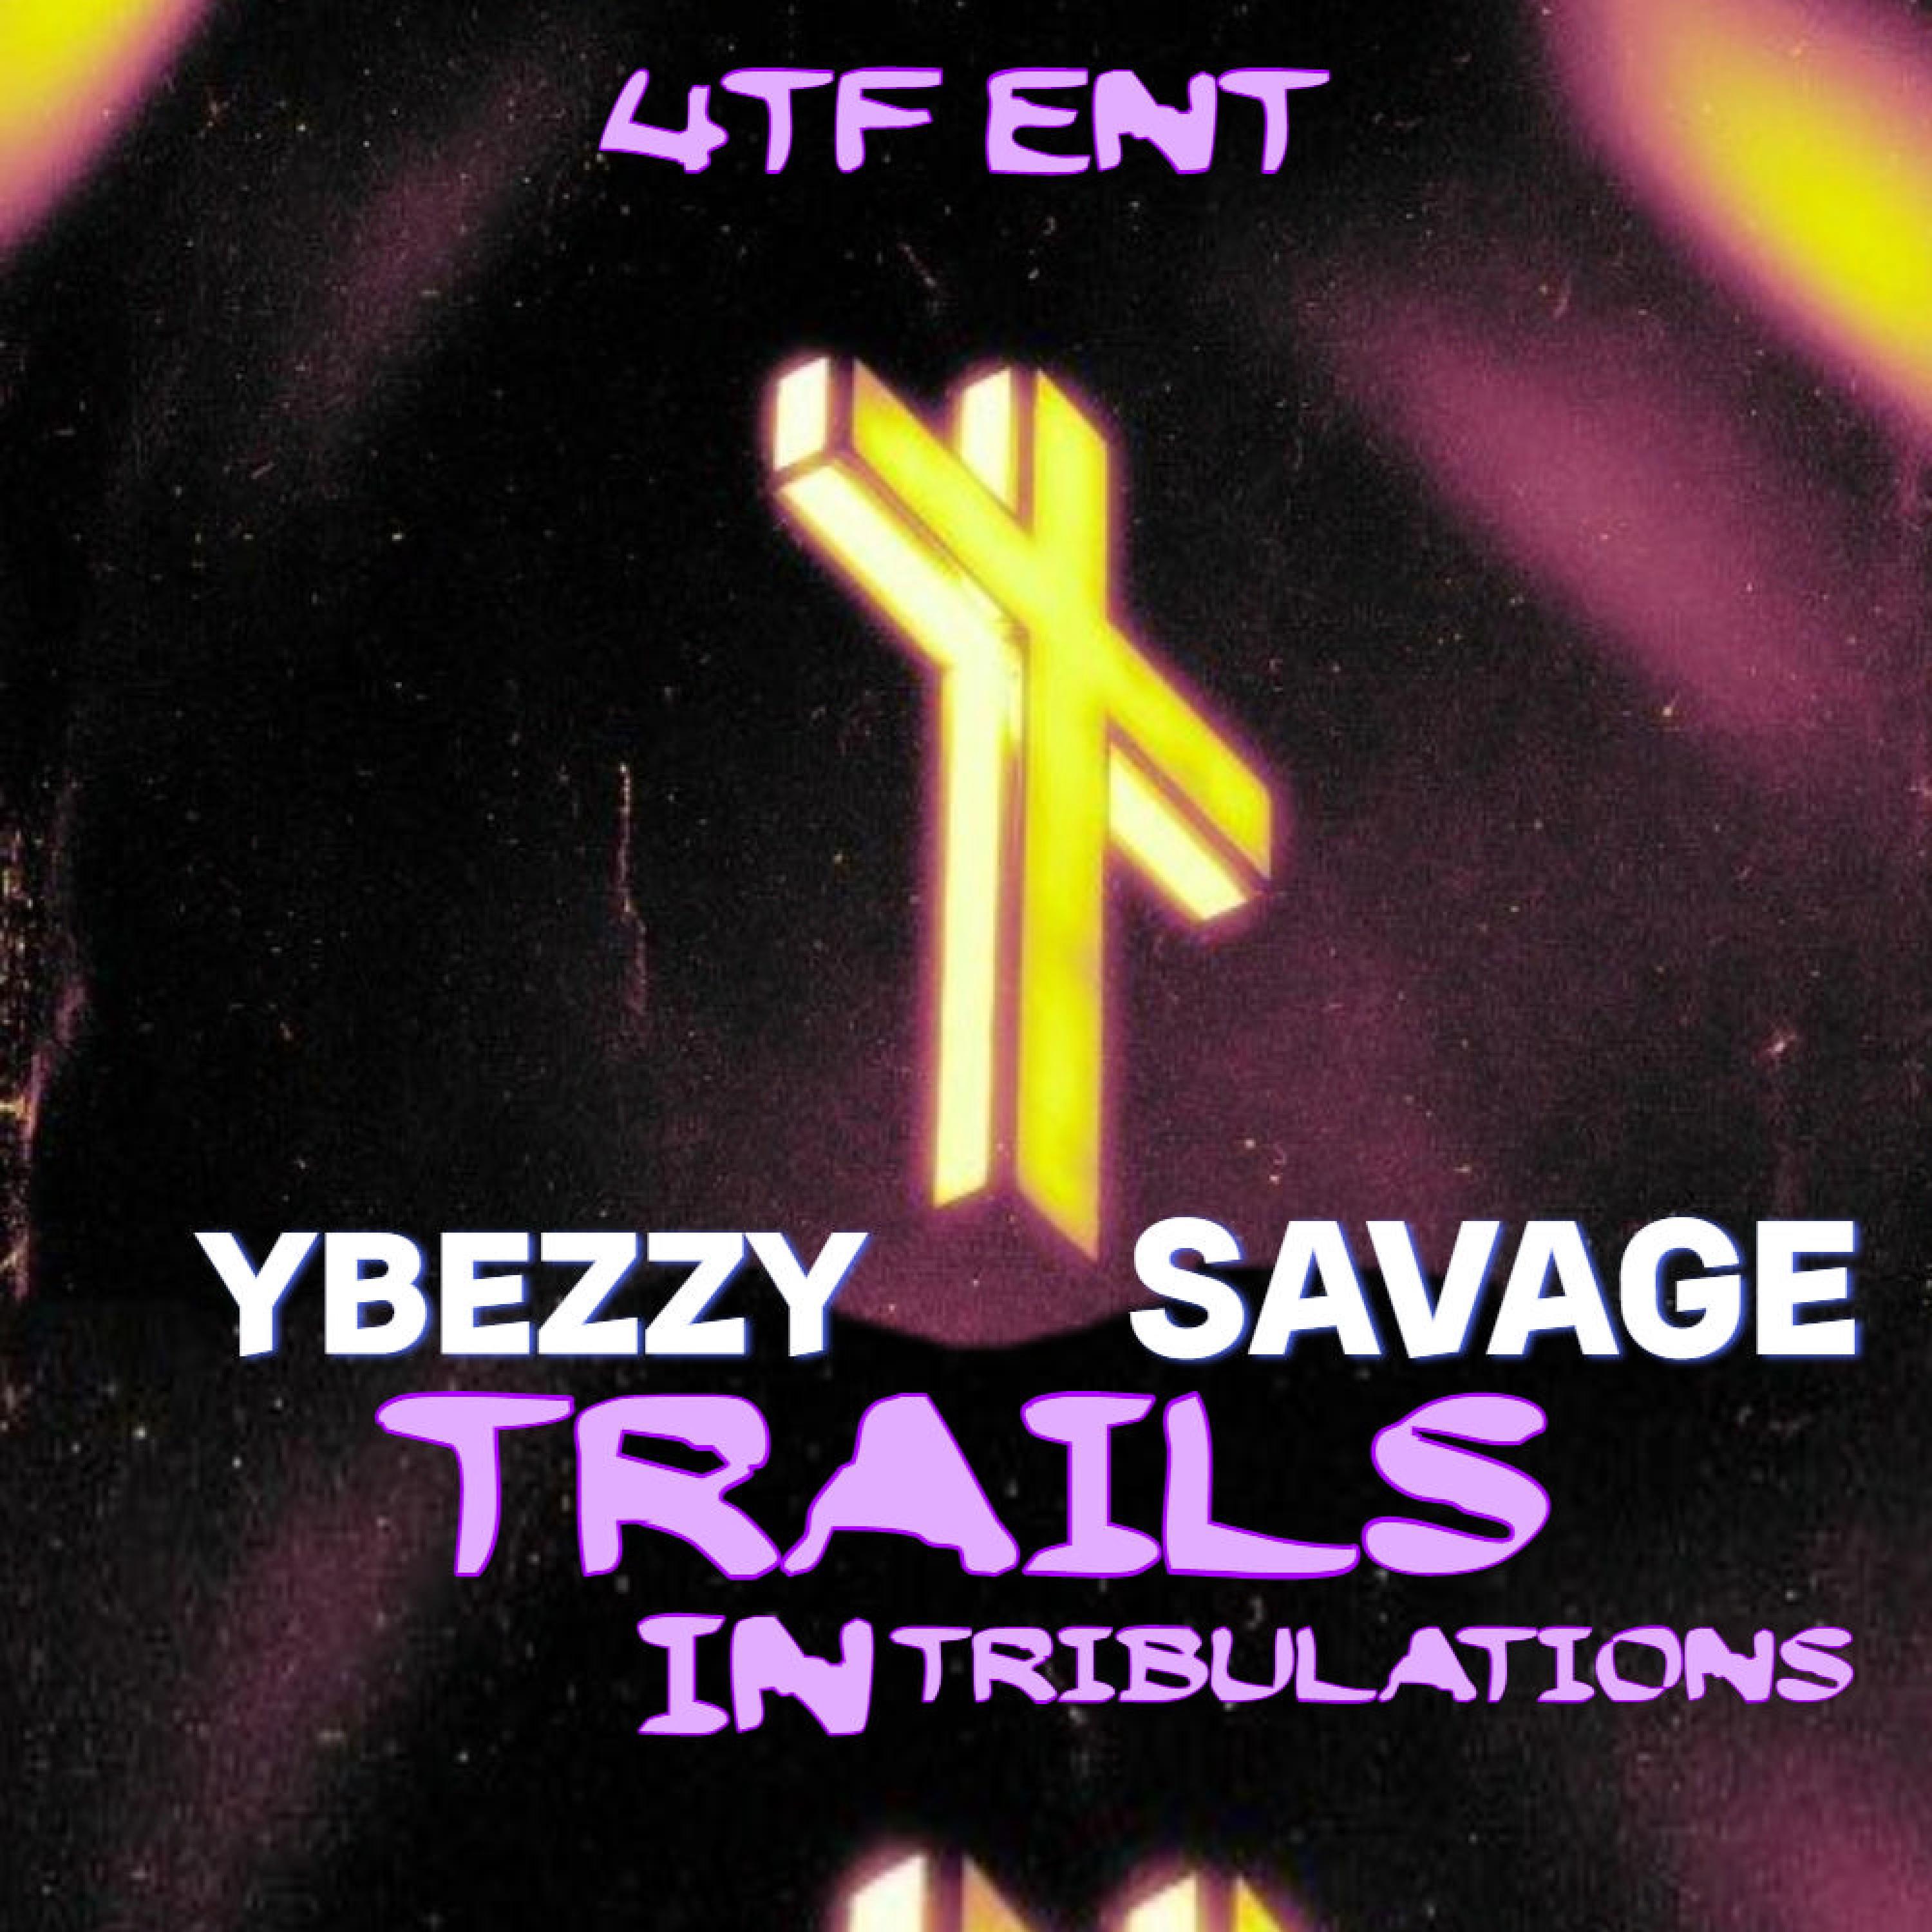 4TF ENT - TRIALS IN TRIBULATIONS (feat. YBEZZY & SAVAGE)